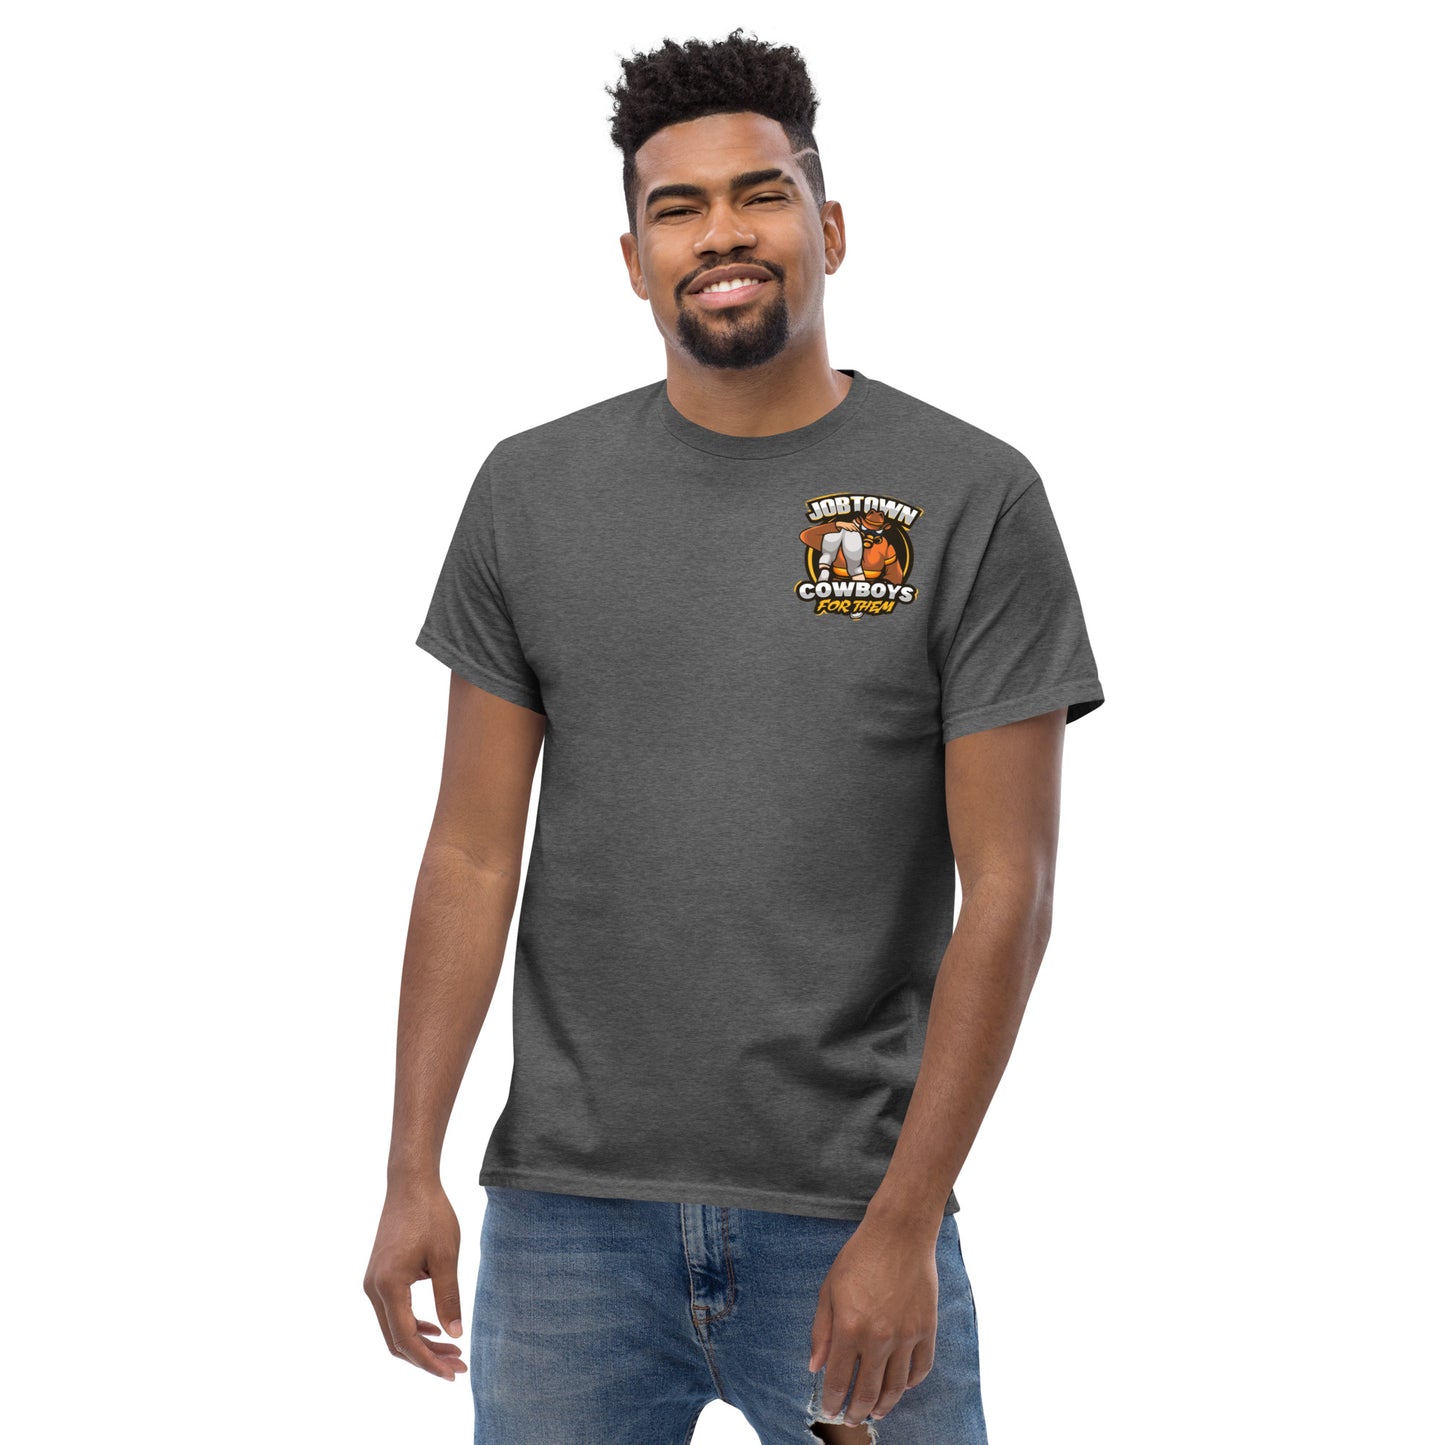 Jobtown Cowboys Firefighter- For Them  classic tee